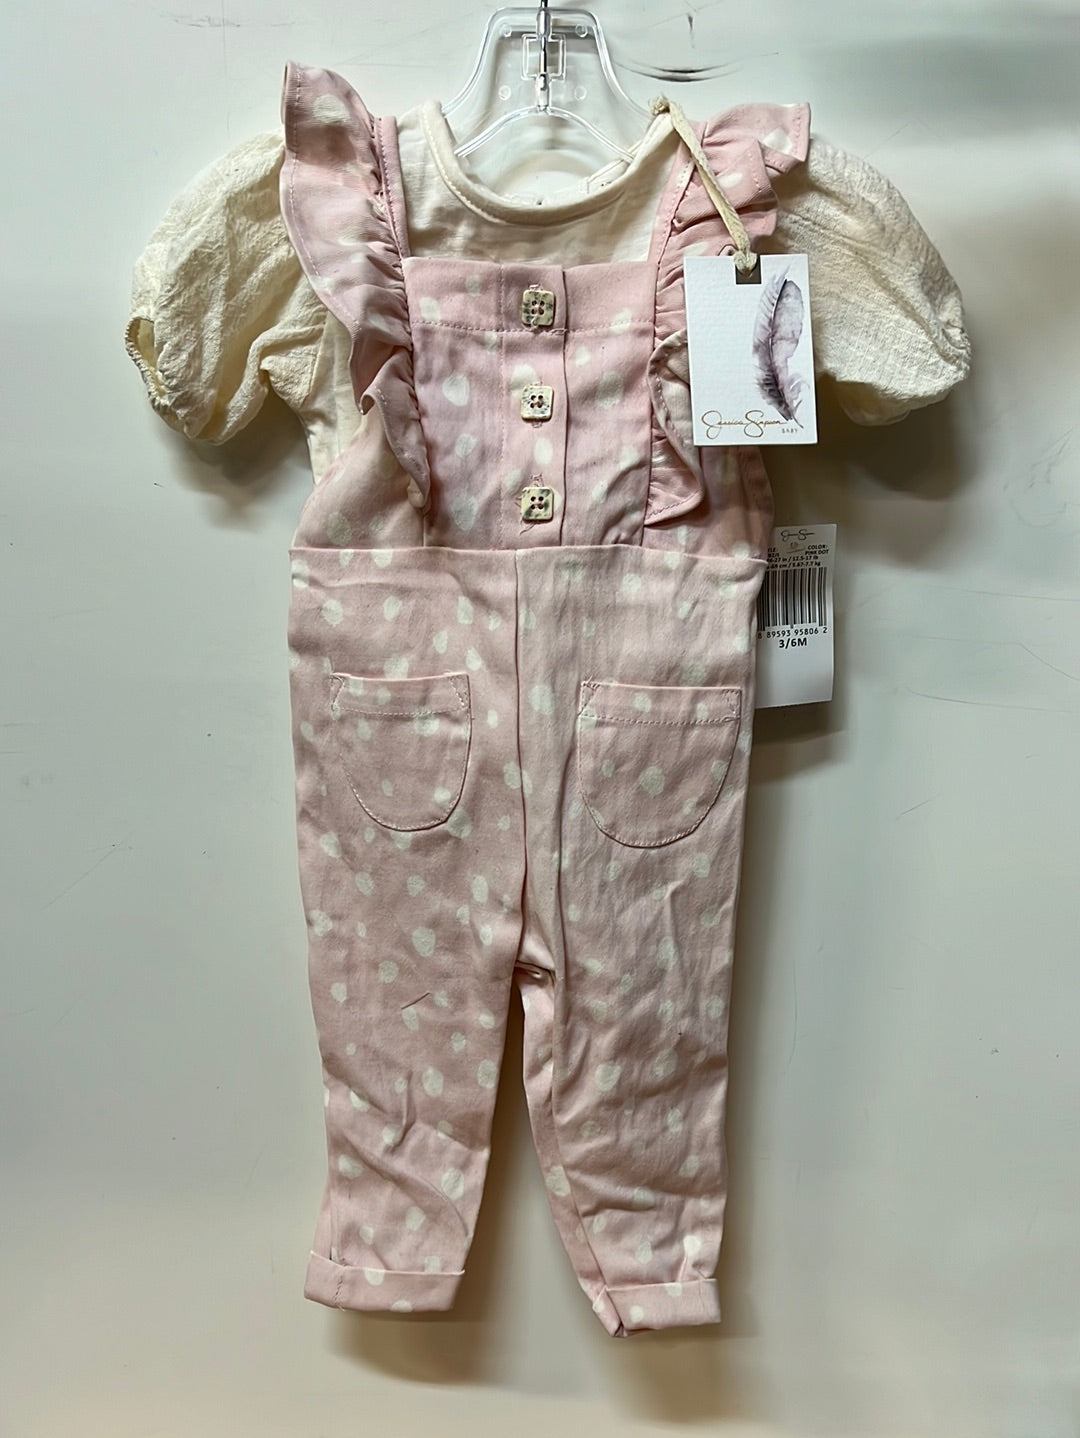 New Jessica Simpson Outfit, Size 3-6M